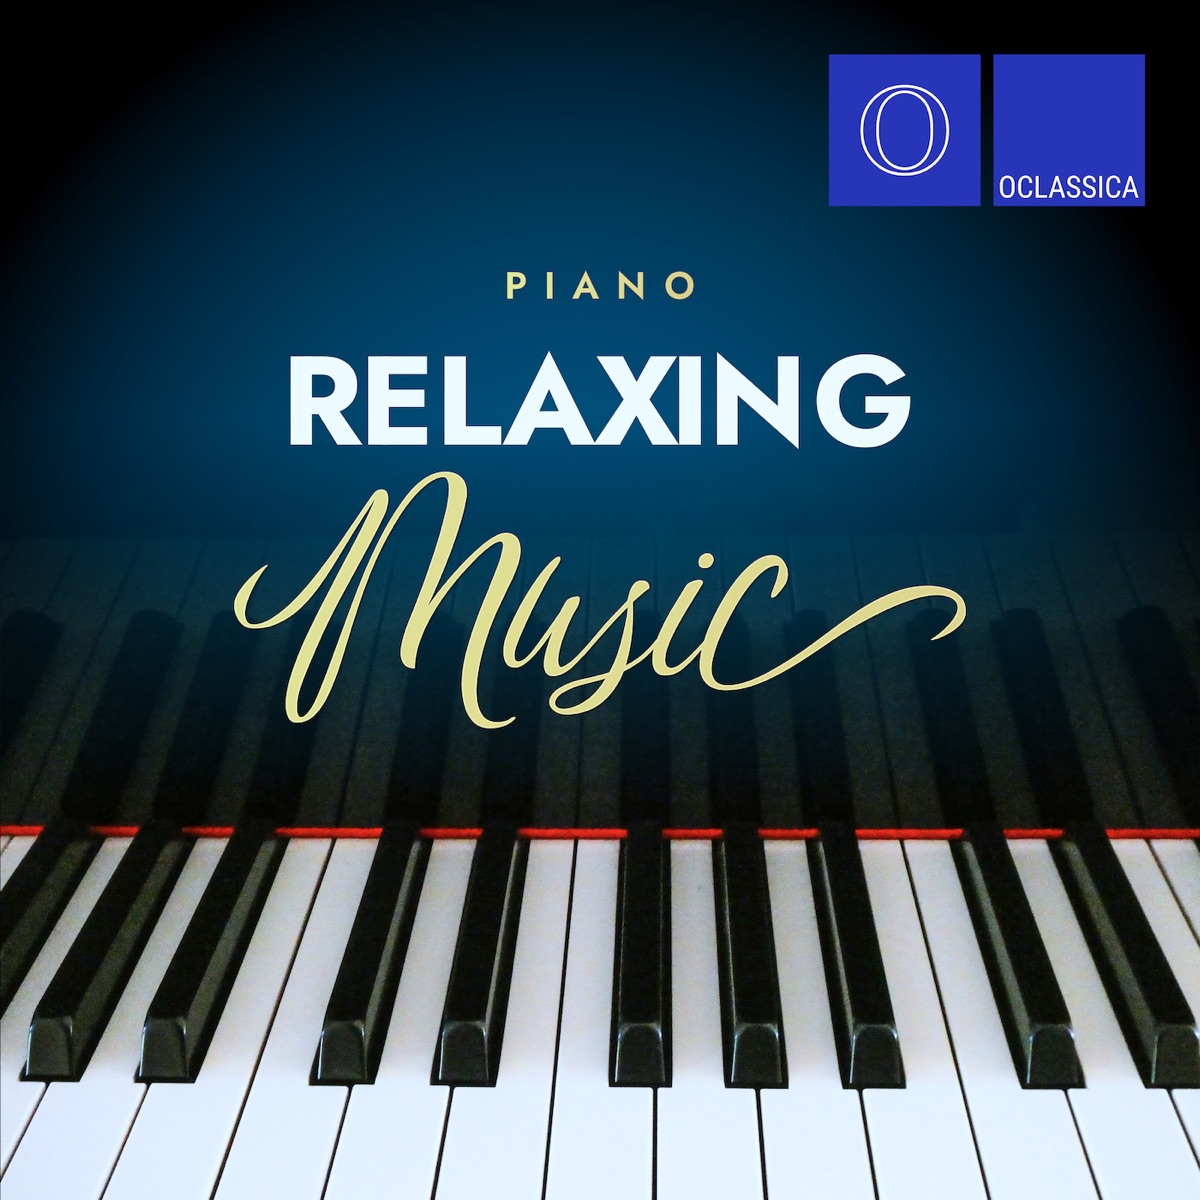 Piano Relaxing Music - Album by Various Artists - Apple Music